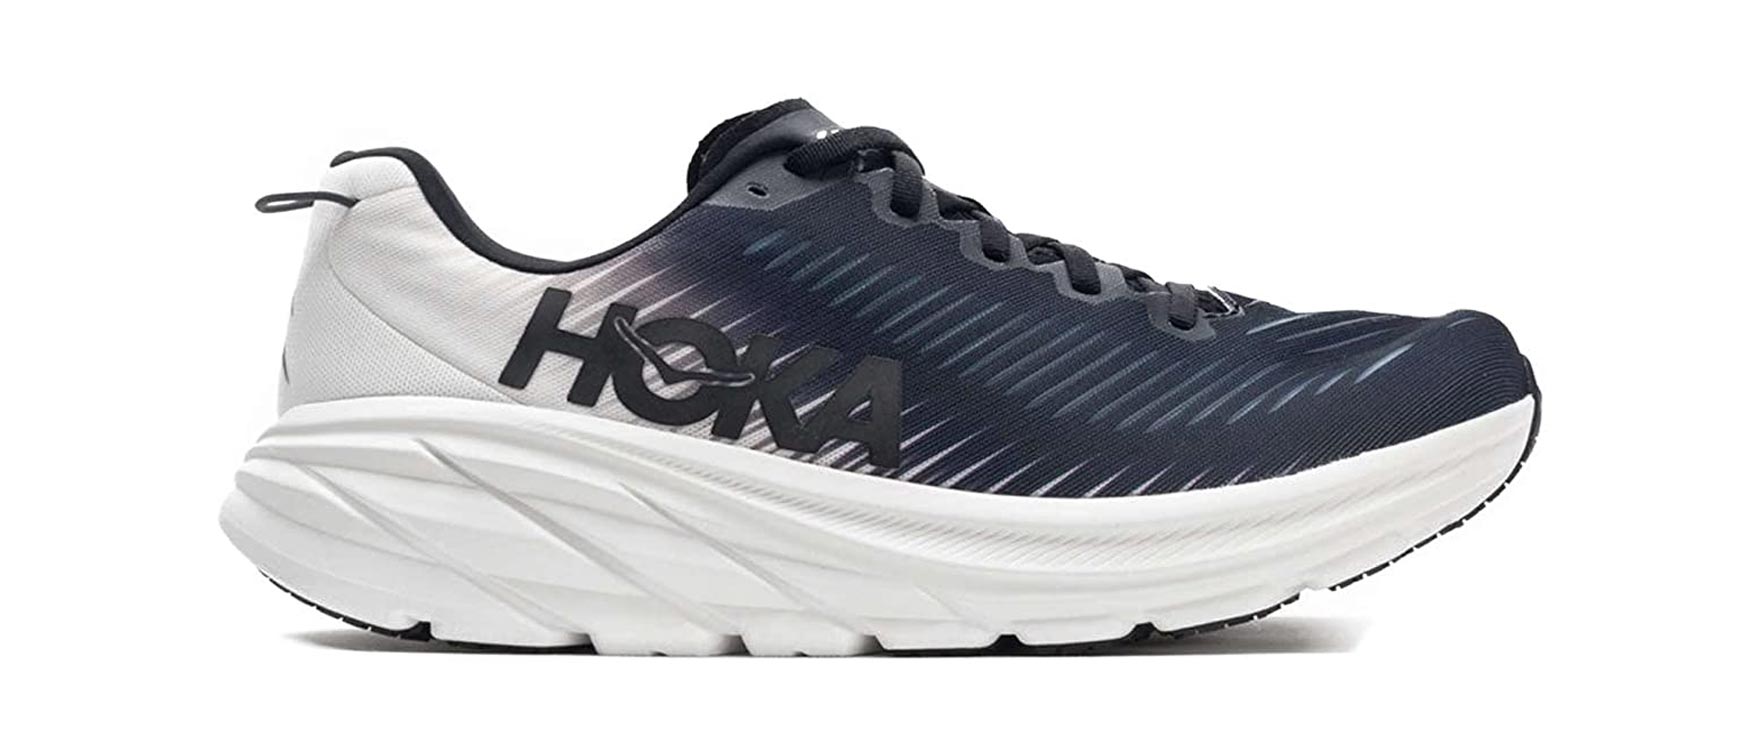 12. HOKA ONE ONE Womens Rincon 3 Synthetic Textile Trainers